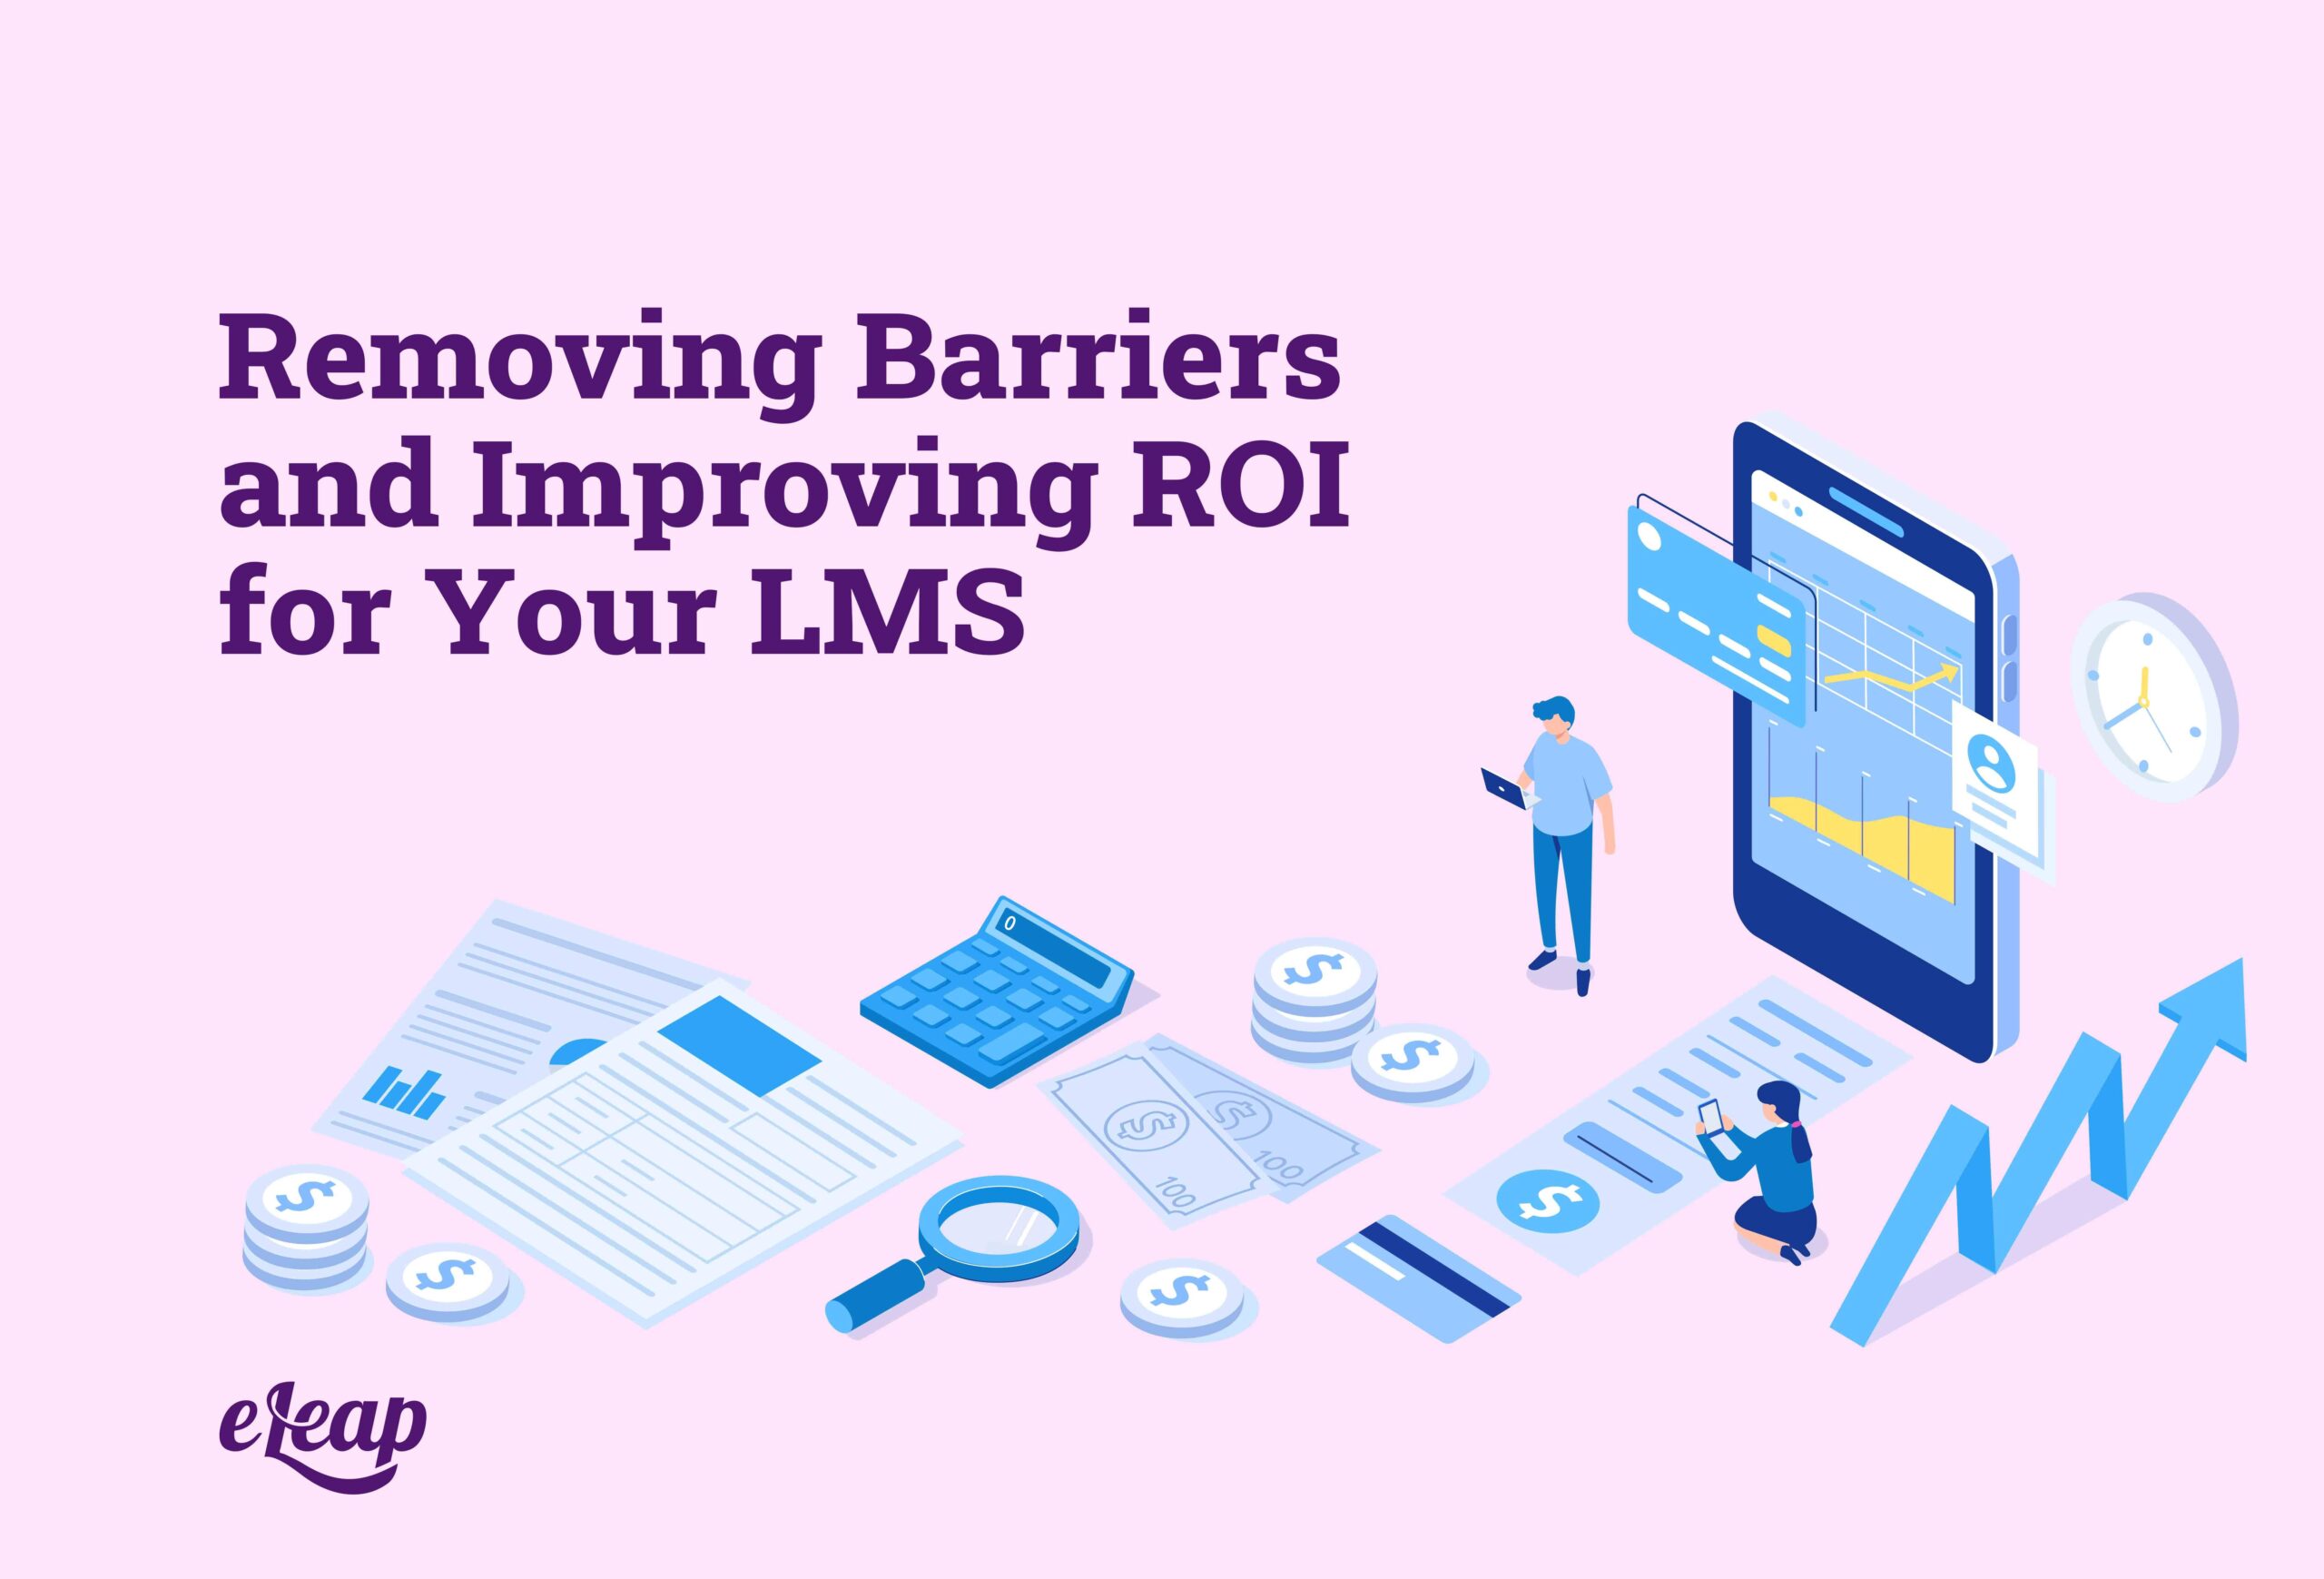 Removing Barriers and Improving ROI for Your LMS